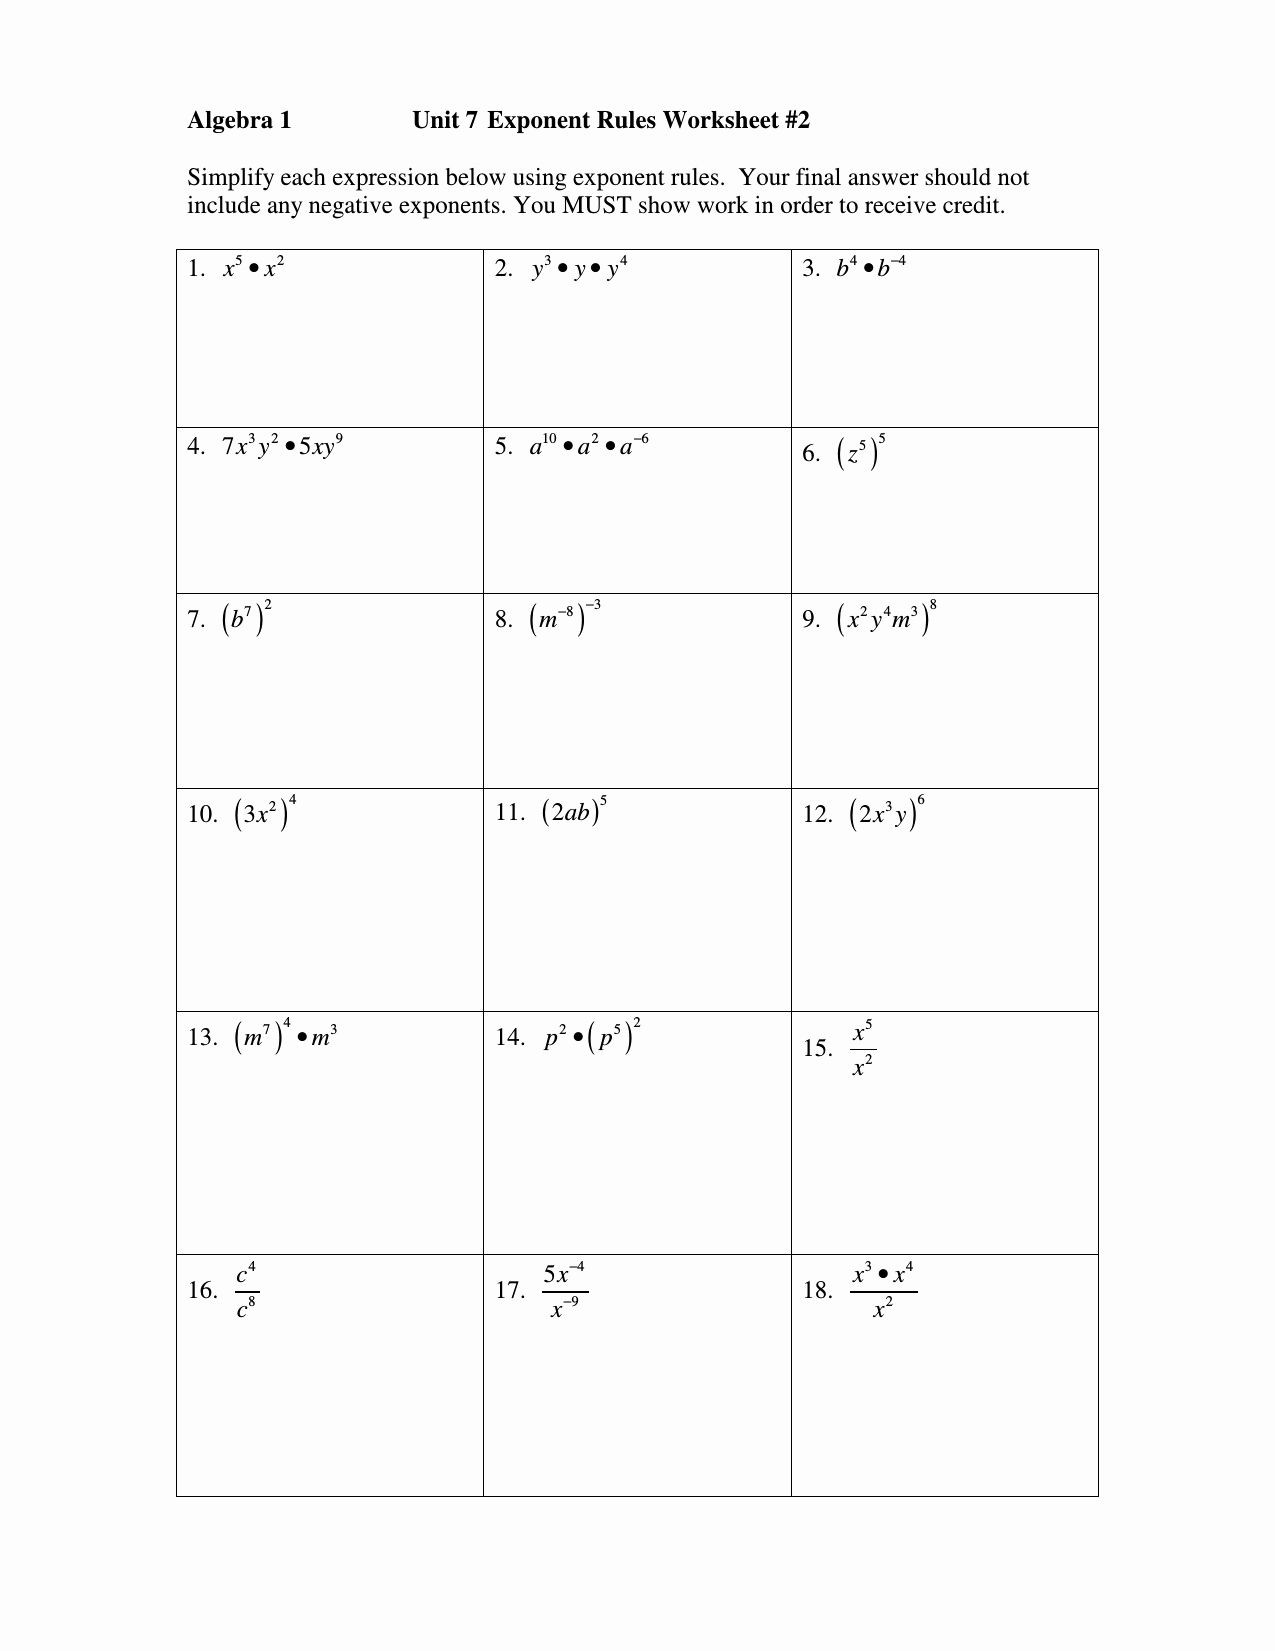 Algebra 2 Review Worksheet 50 Algebra 2 Review Worksheet In 2020 with Images